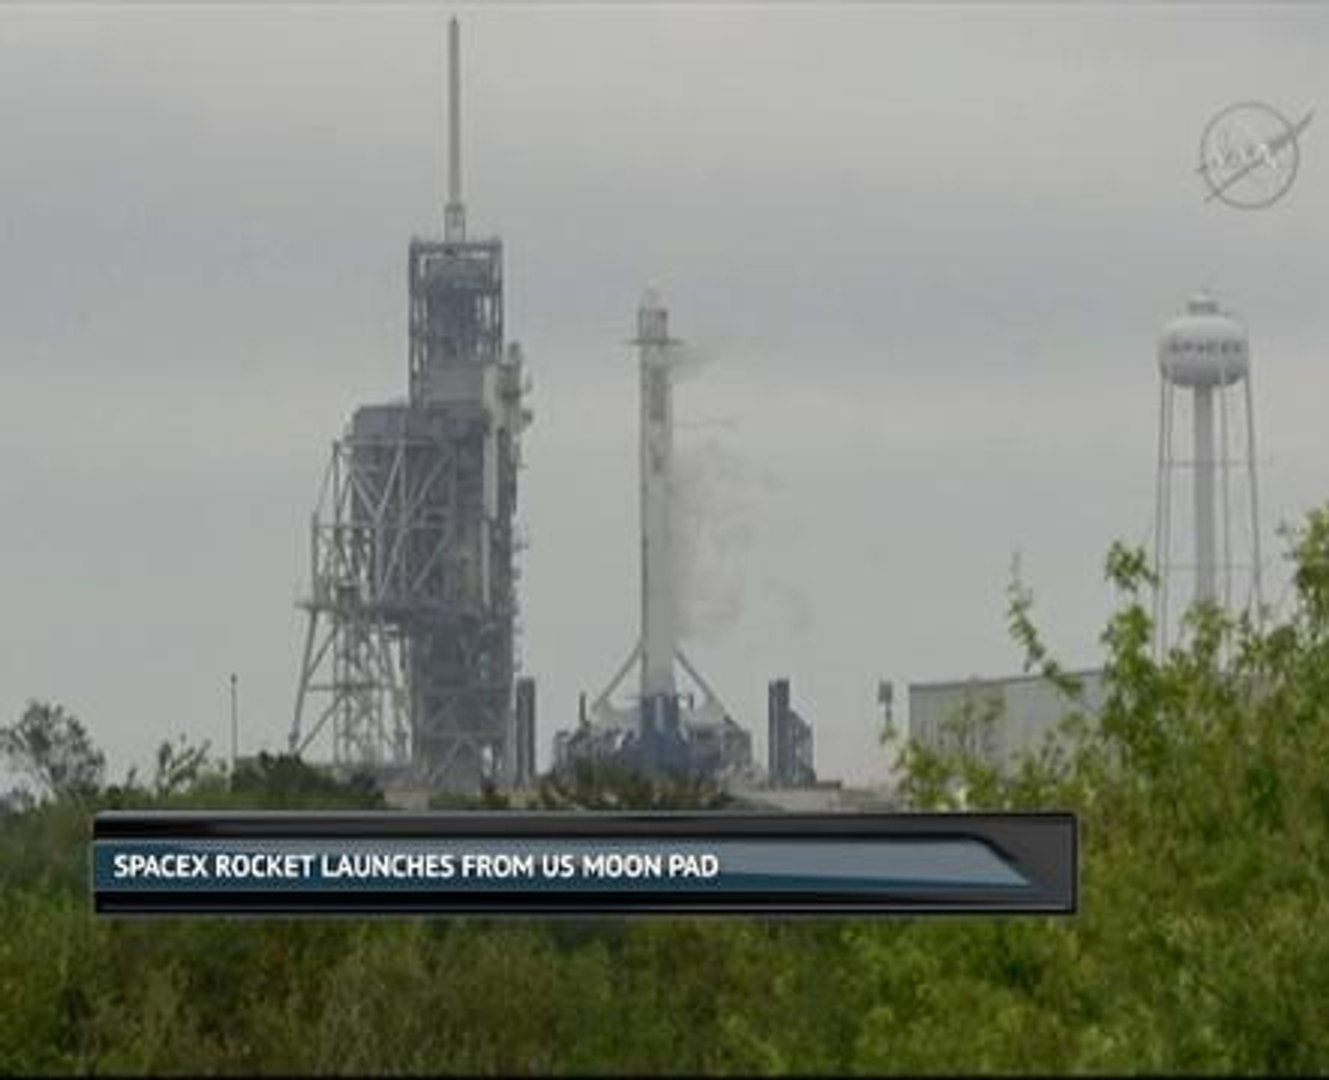 SpaceX rocket launches from US moon pad